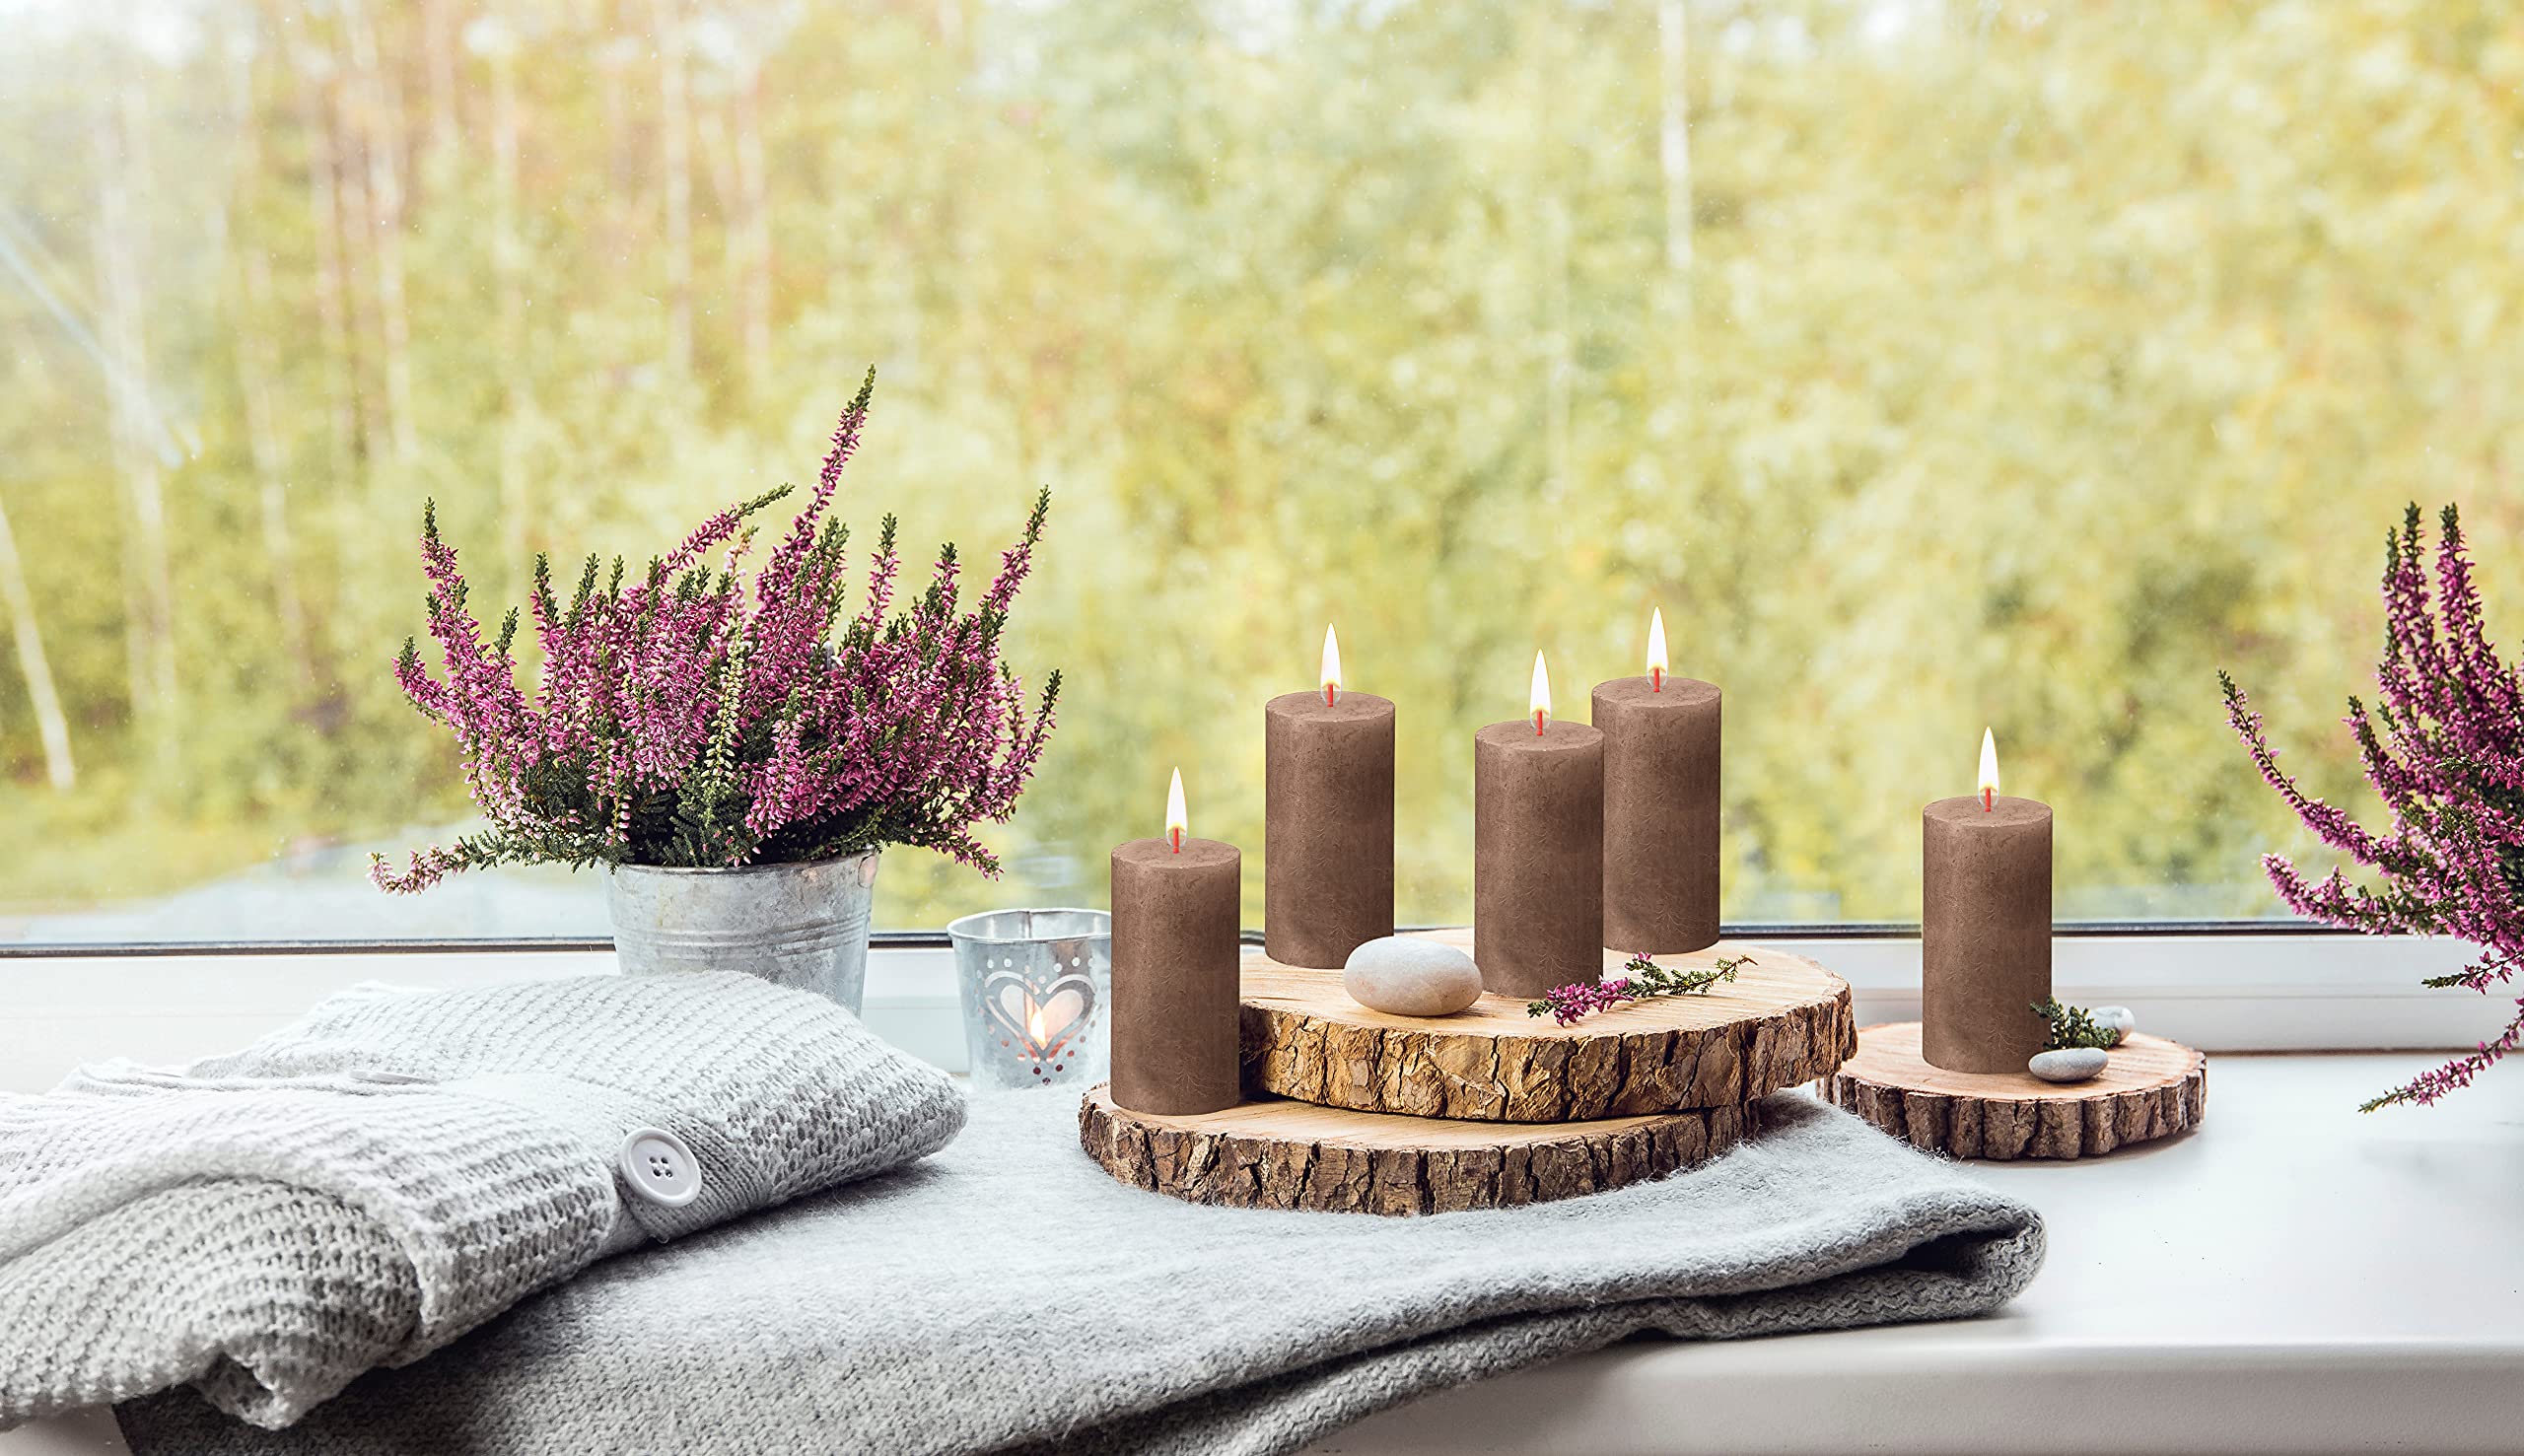 BOLSIUS 4 Pack Suede Brown Rustic Pillar Candles - 2 X 4 Inches - Premium European Quality - Includes Natural Plant-Based Wax - Unscented Dripless Smokeless 30 Hour Party D�cor and Wedding Candles  - Acceptable